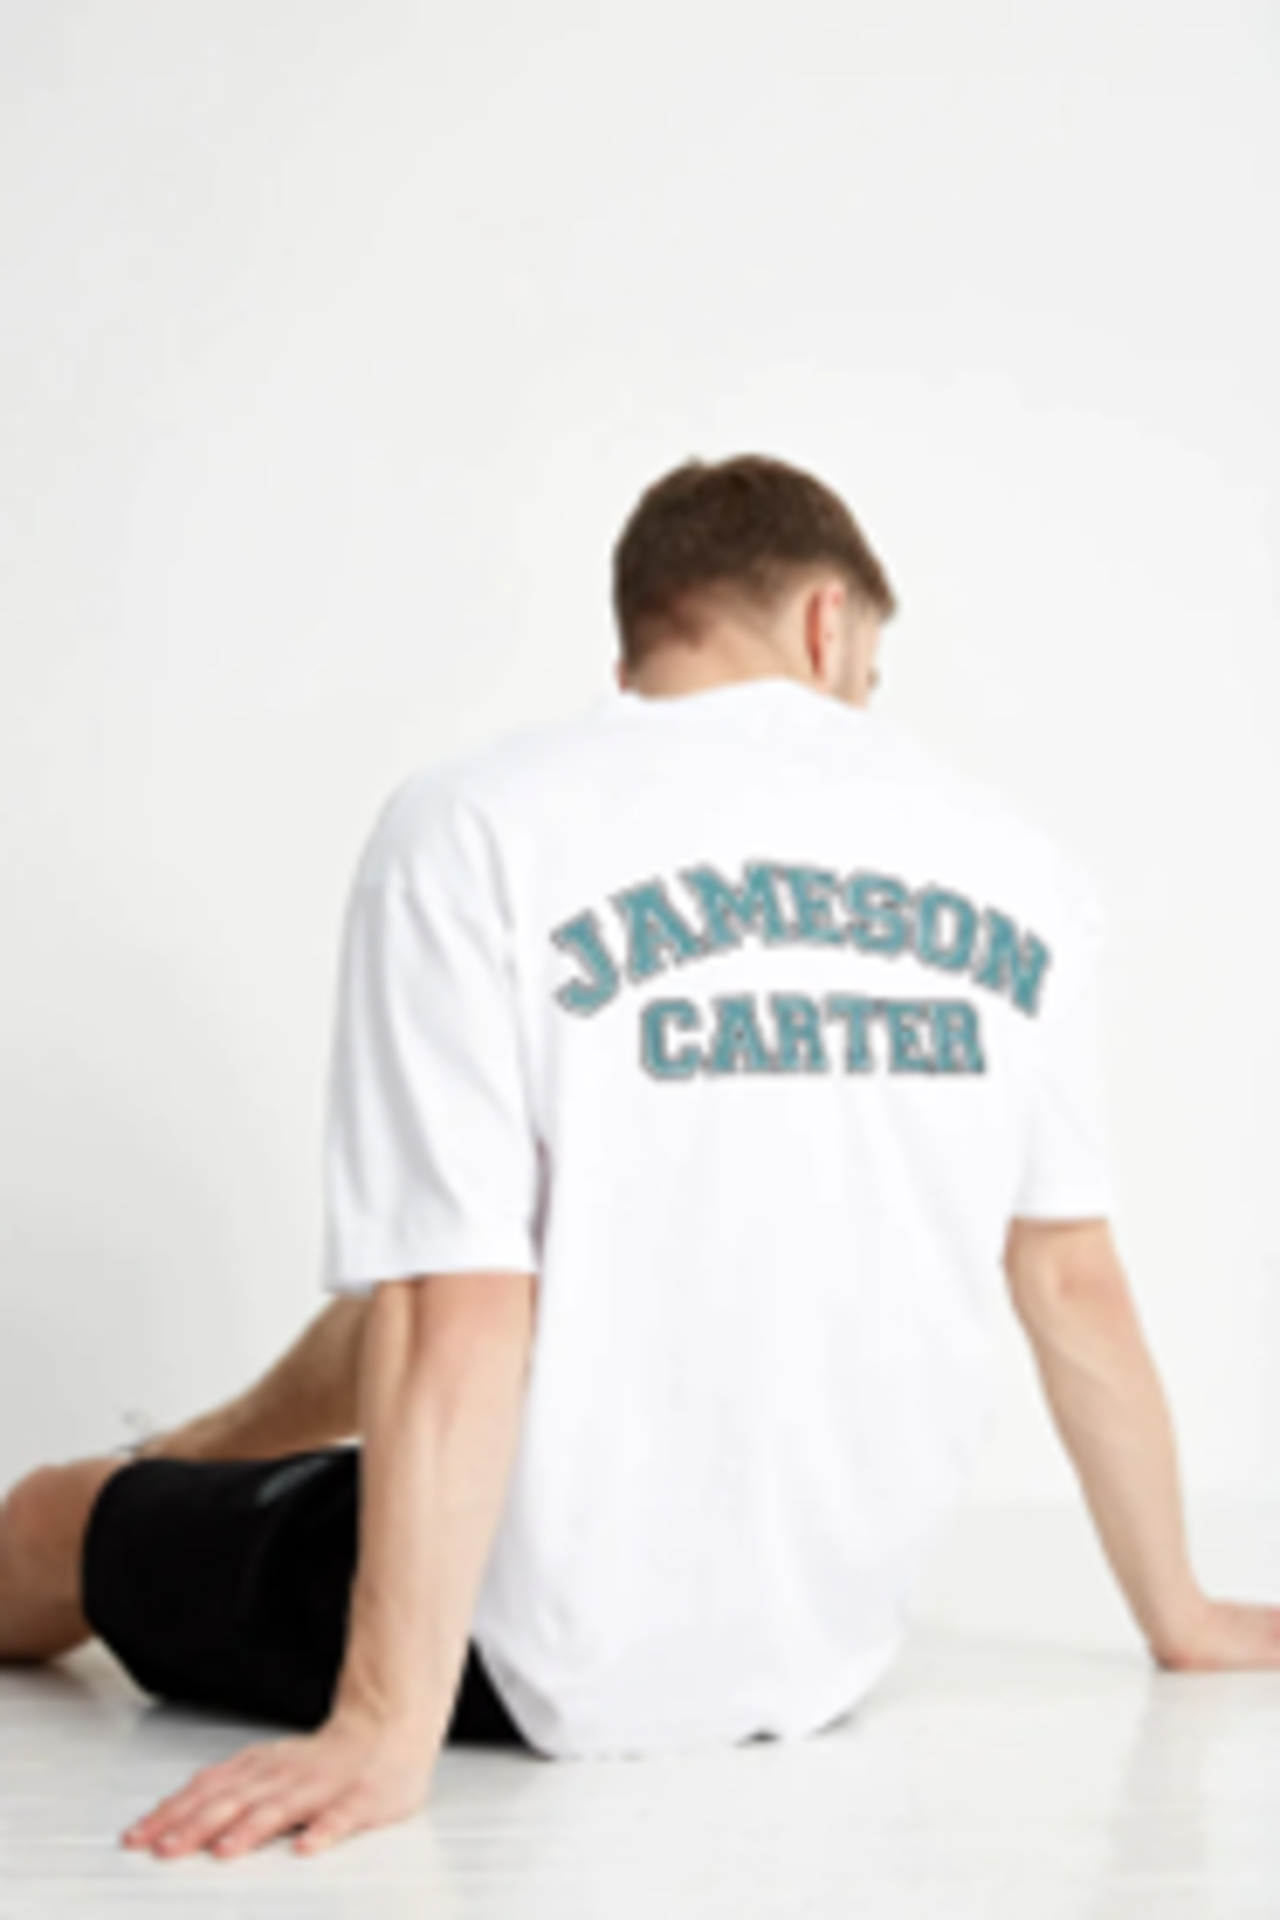 TRADE LOT 100 x NEW MIXED ITEMS OF JAMESON CARTER STOCK. TO INCLUDE ITEMS SUCH AS: JACKETS, - Image 8 of 14